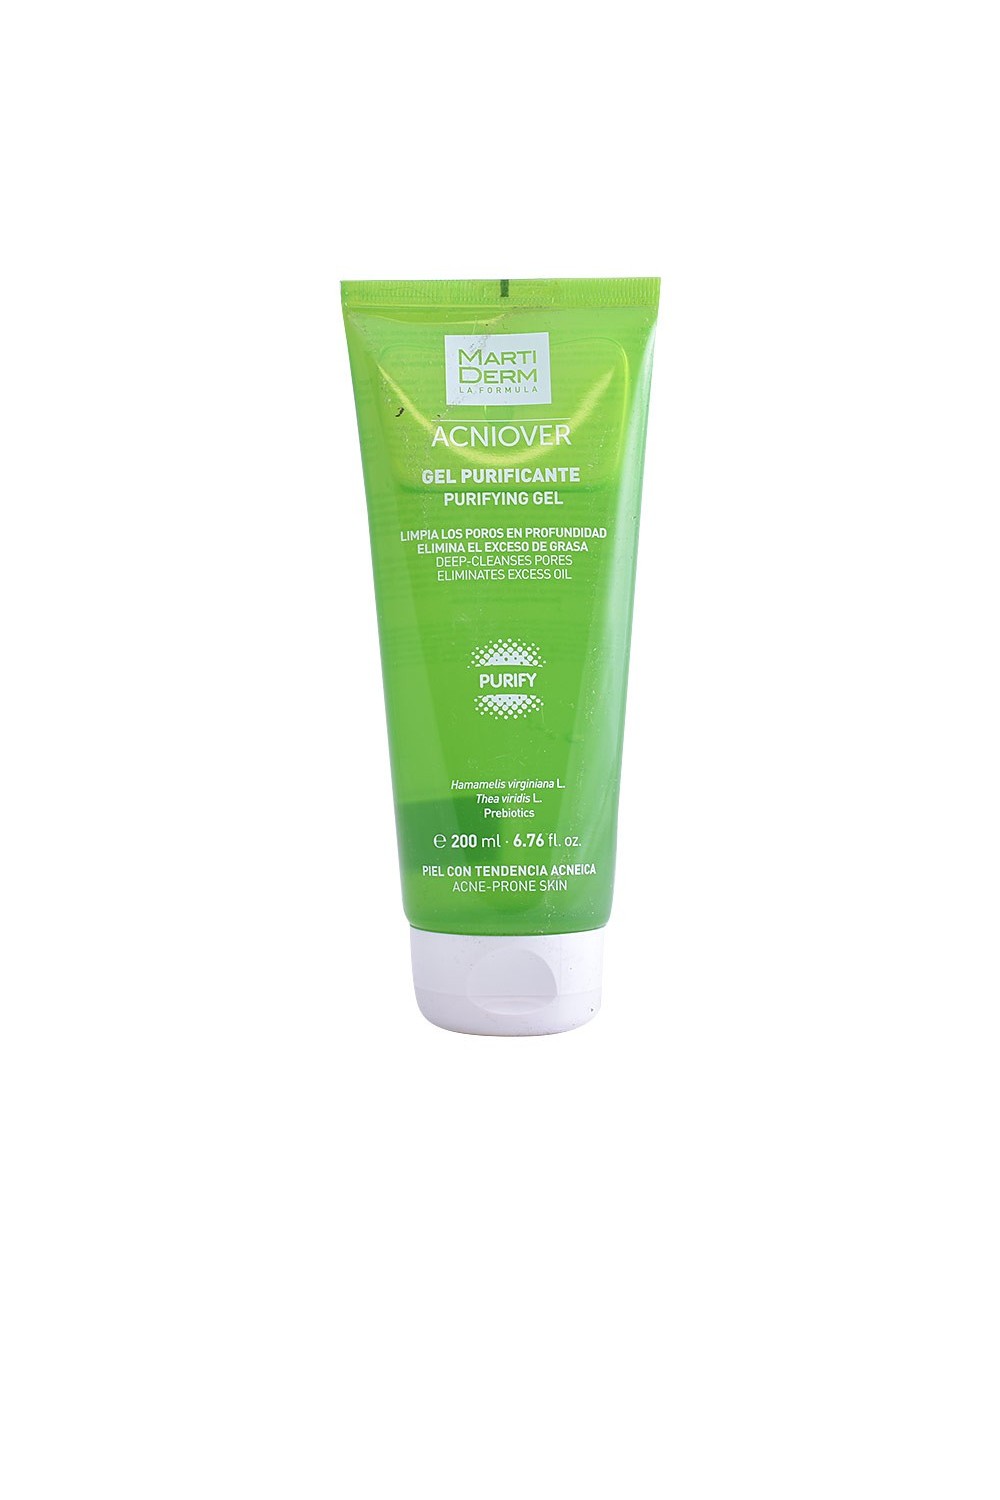 Martiderm™ Acniover Cleansing Gel 200ml